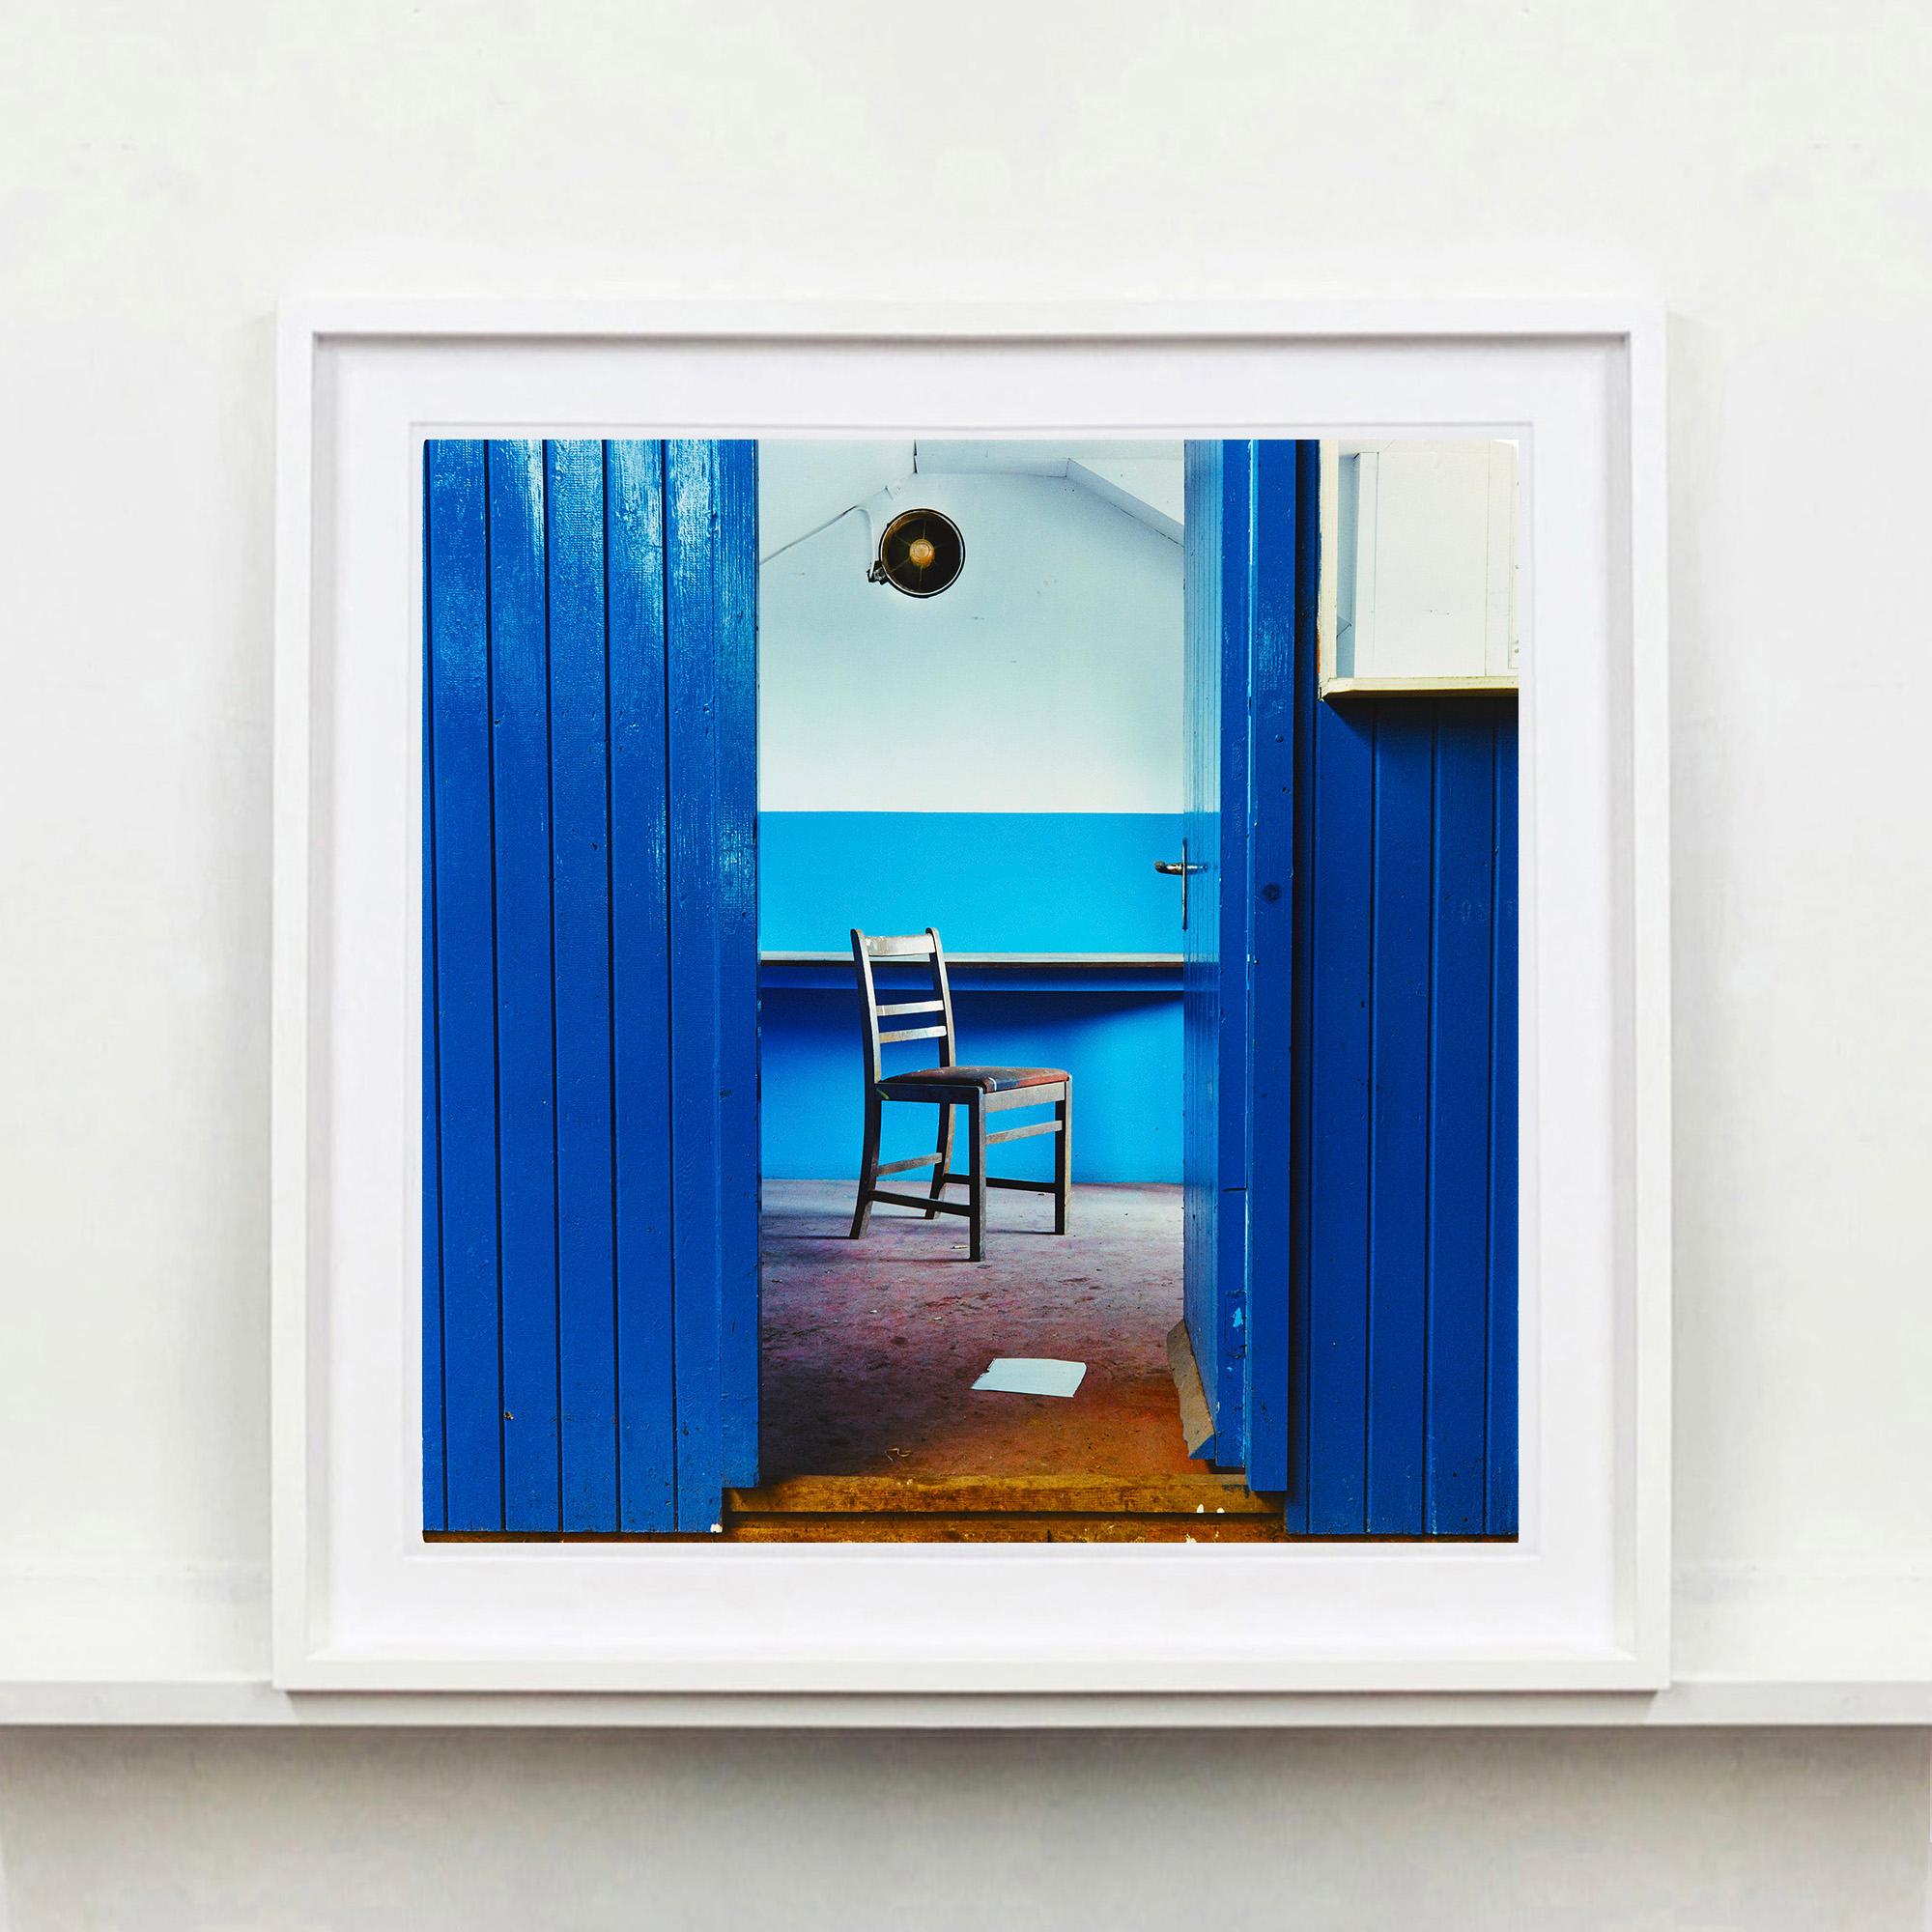 Chair, Northwich - Blue industrial interior photography - Contemporary Print by Richard Heeps